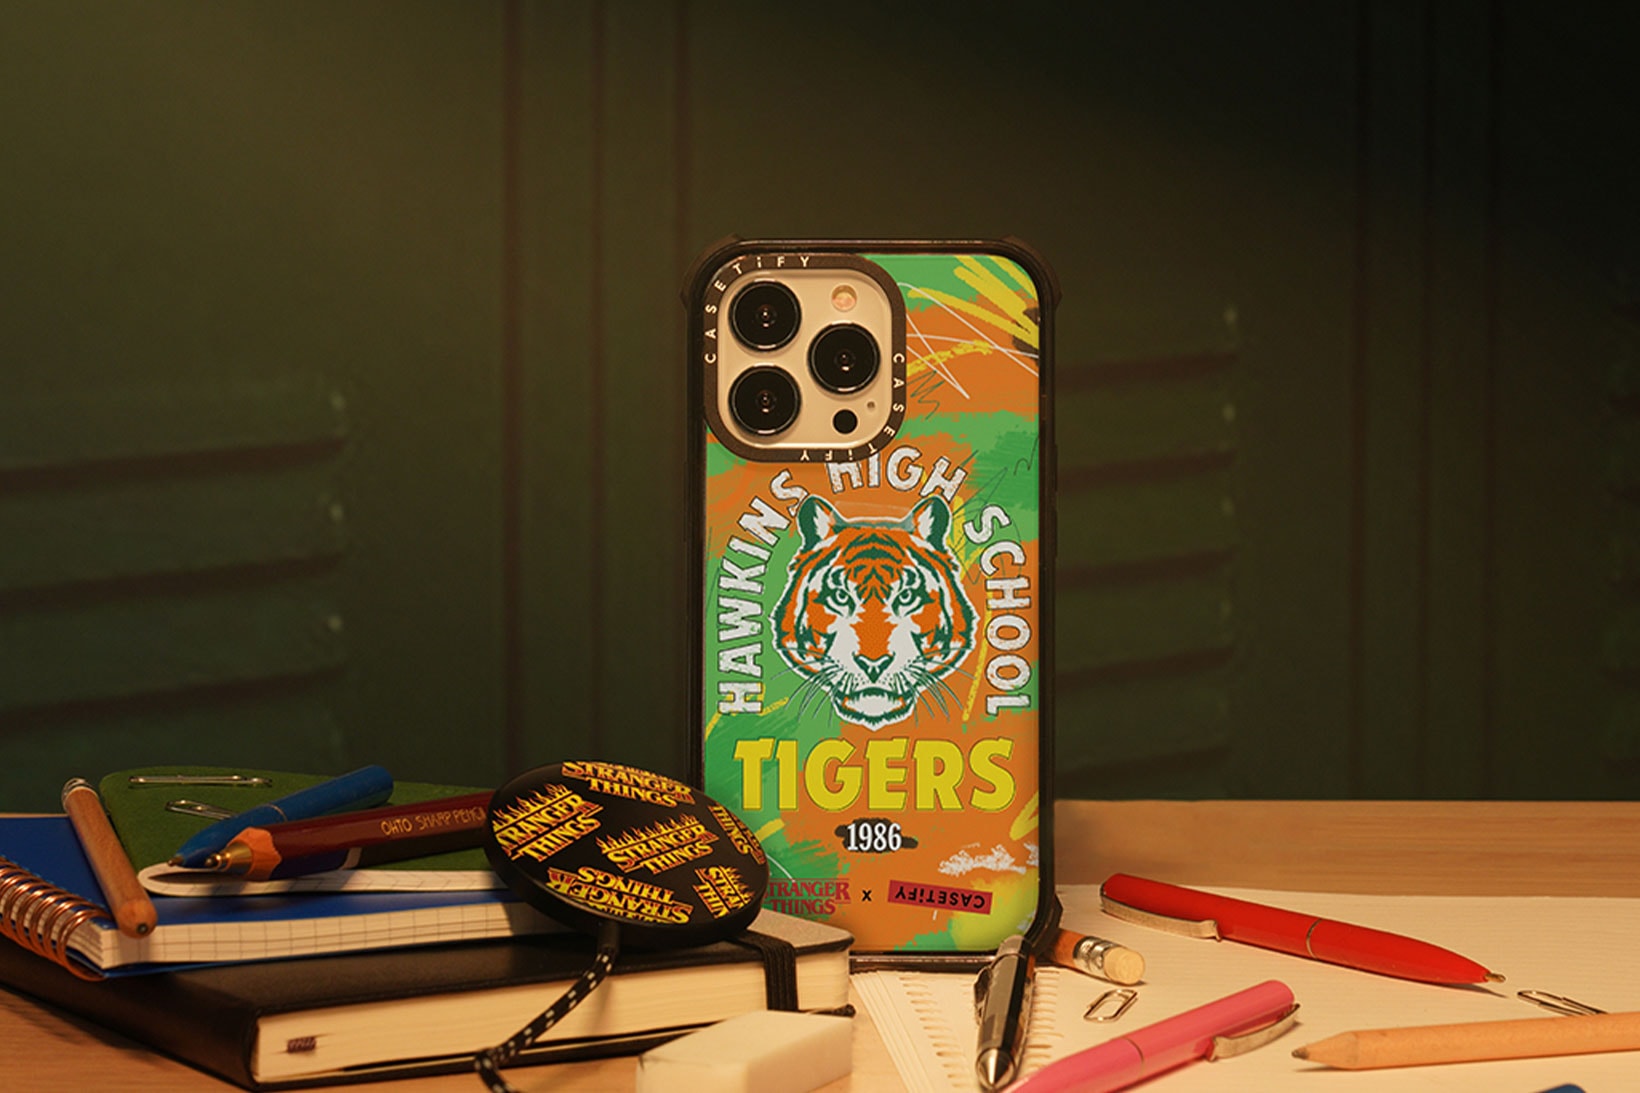 Stranger Things 4 Casetify Netflix Collaboration Phone Cases AirPods Apple Watch Release